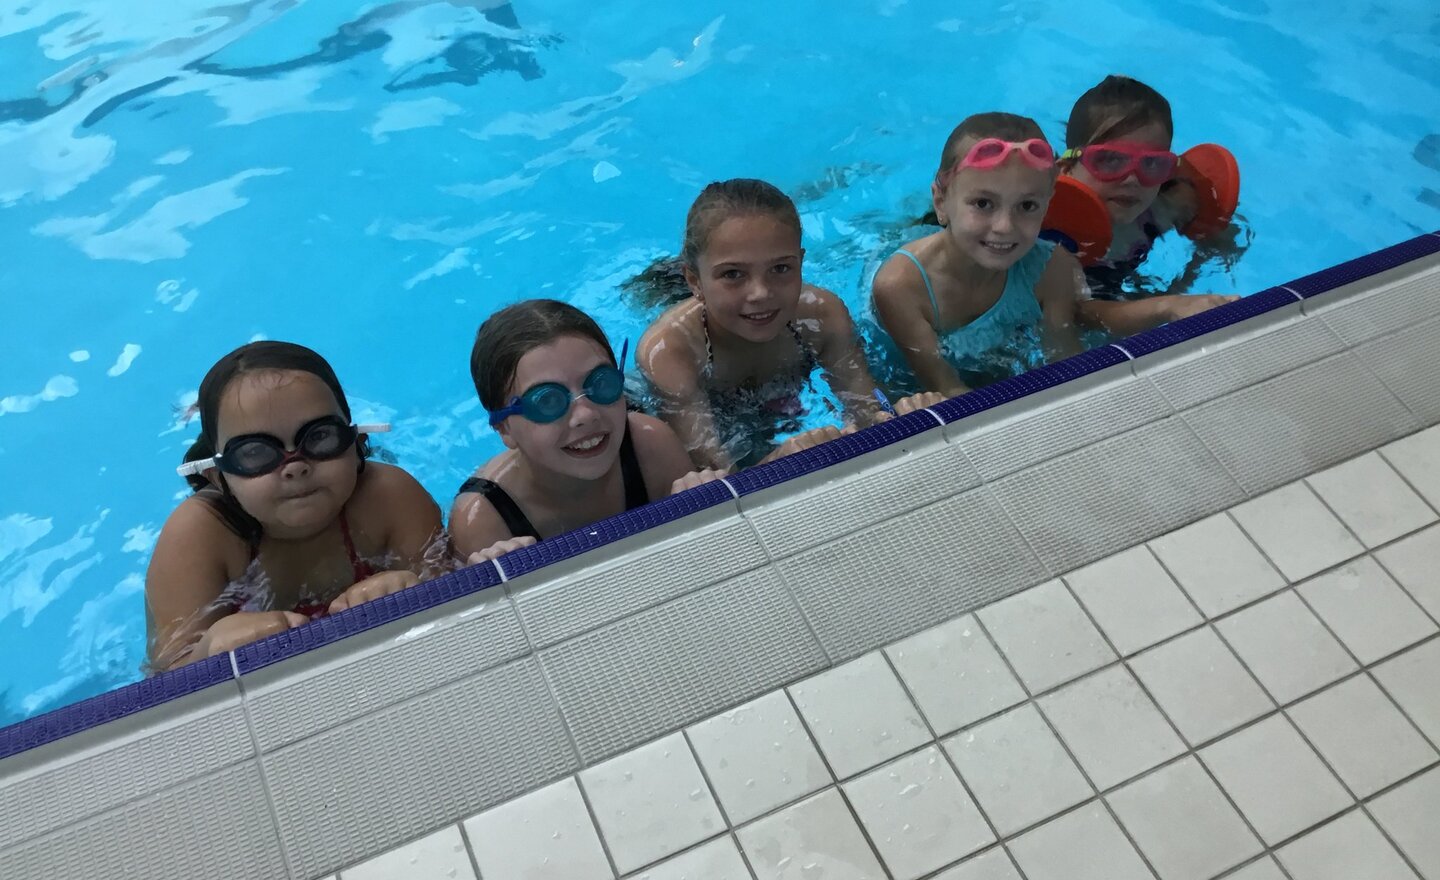 Image of Y4 Fun Session at the Pool